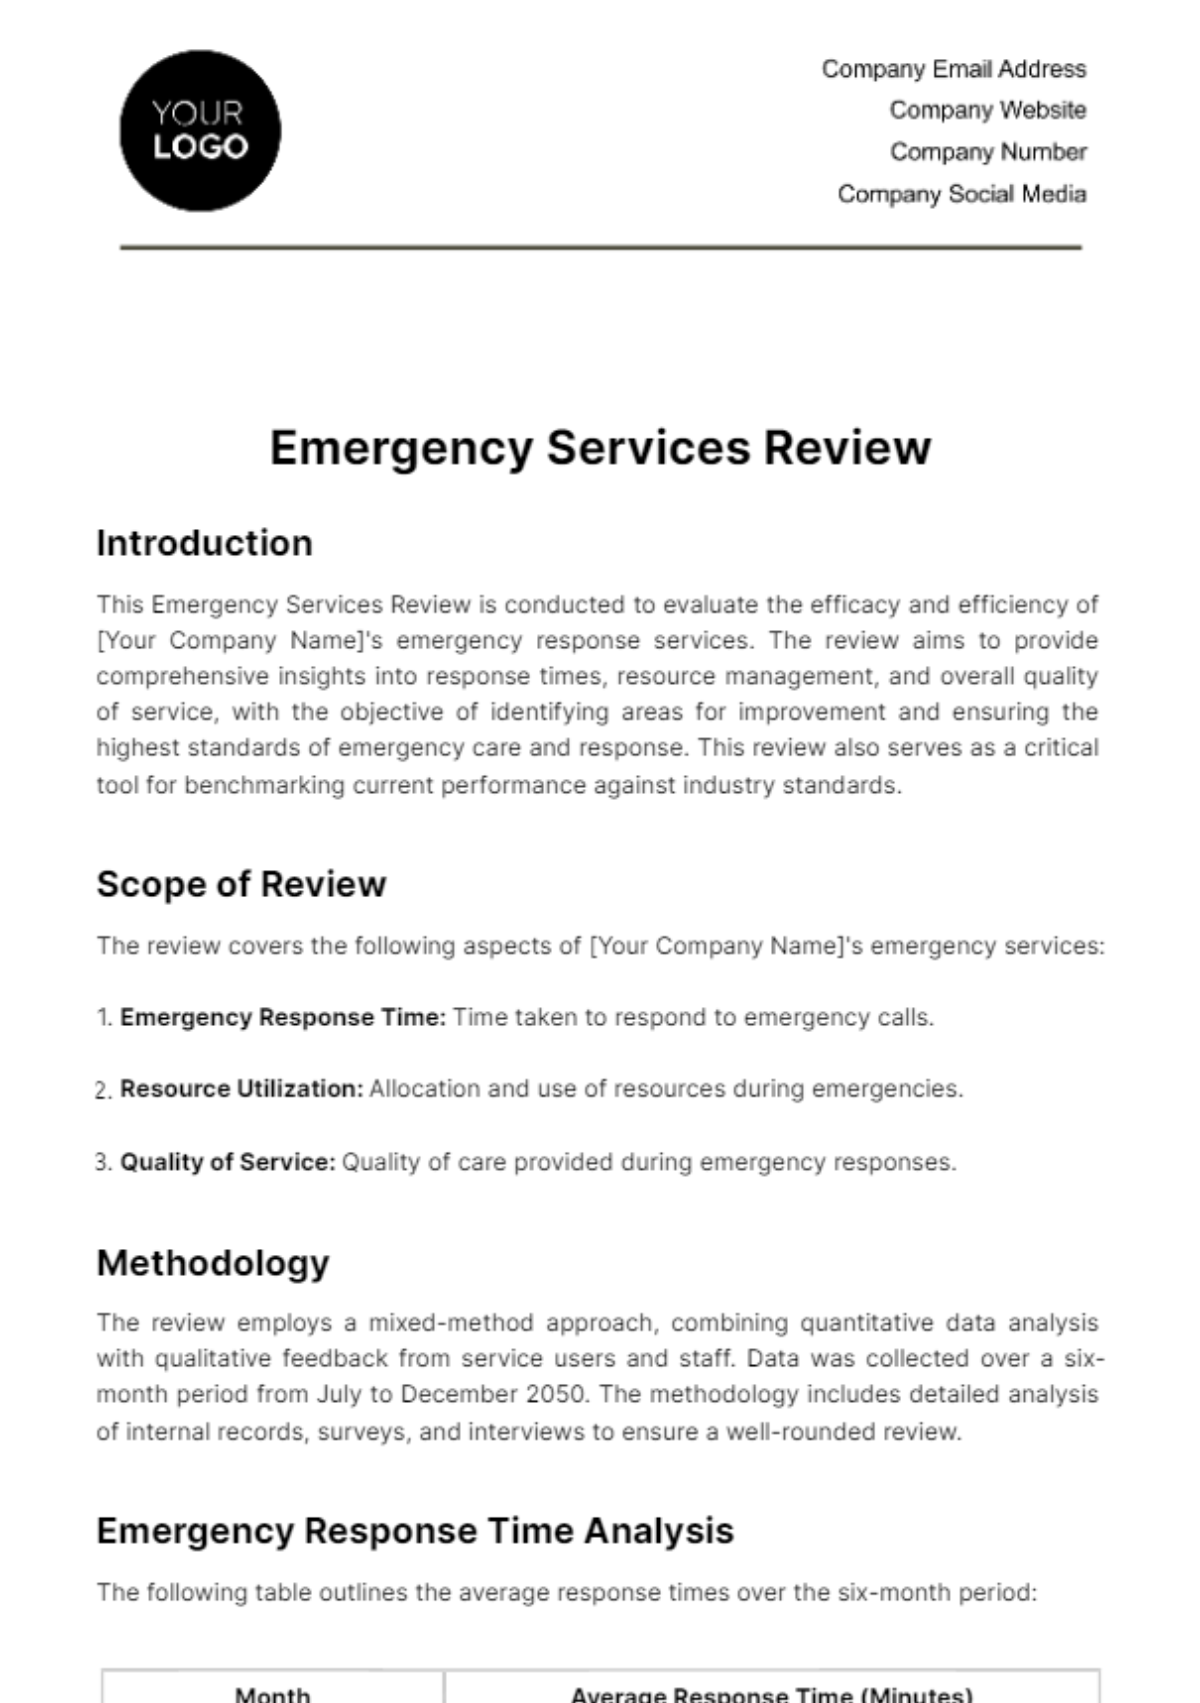 Free Emergency Services Review Template